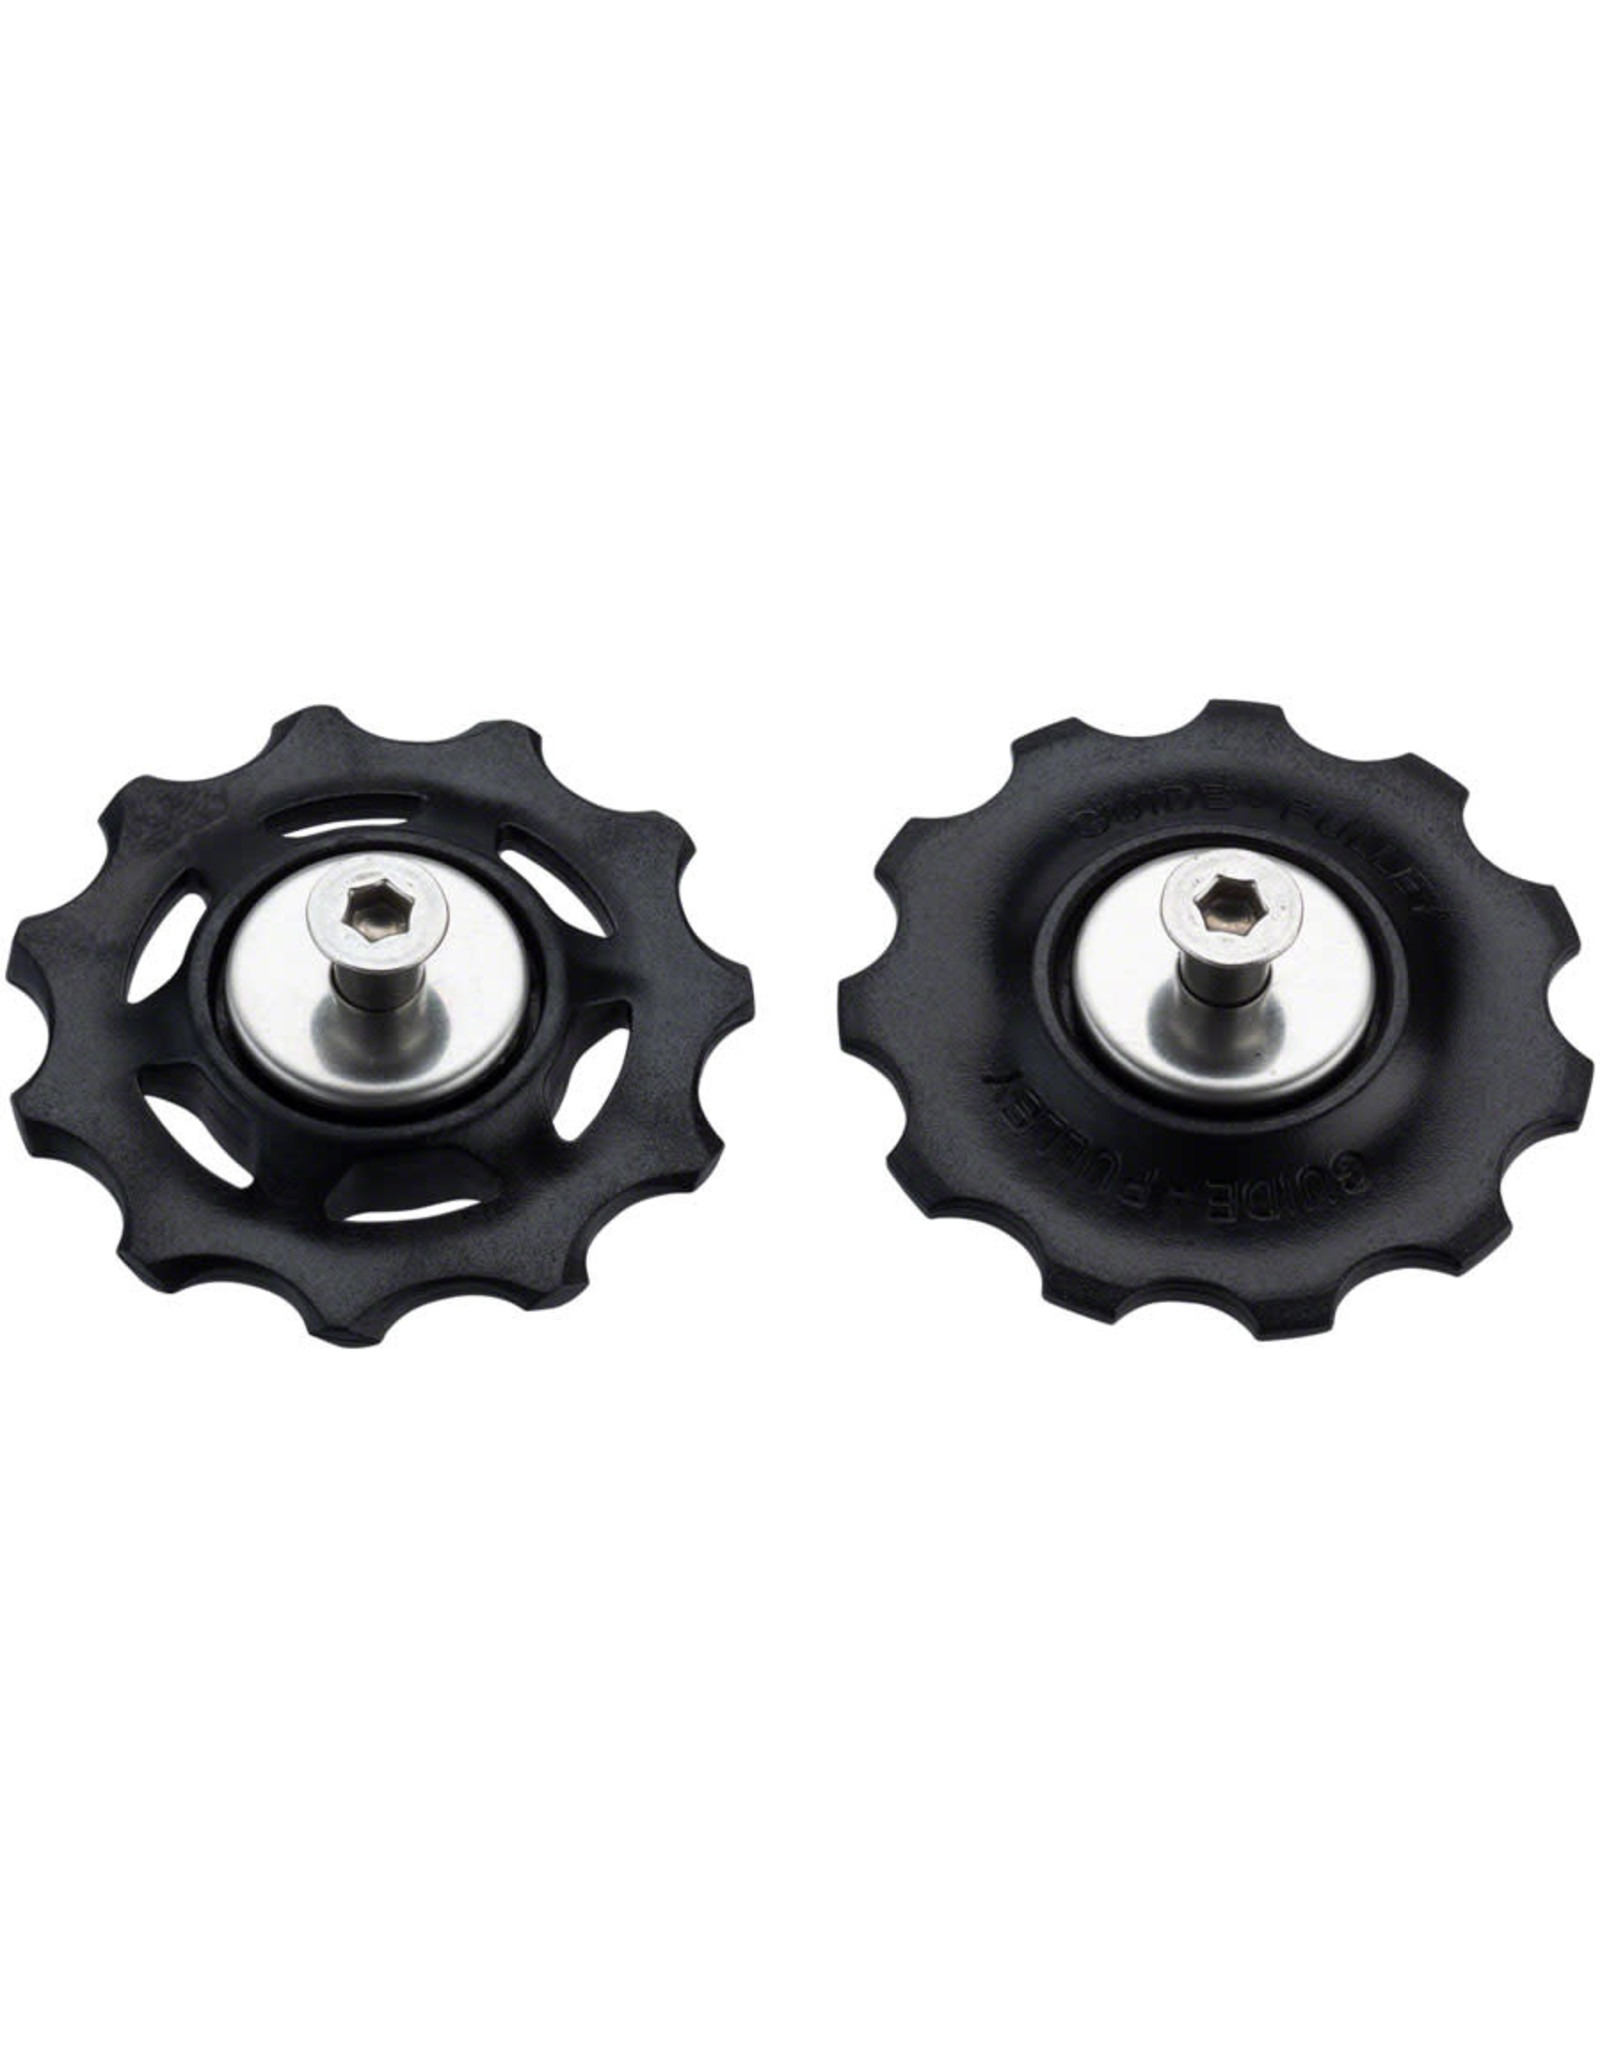 Microshift microSHIFT Rear Derailleur Pulley Kit For Non-Clutch Models